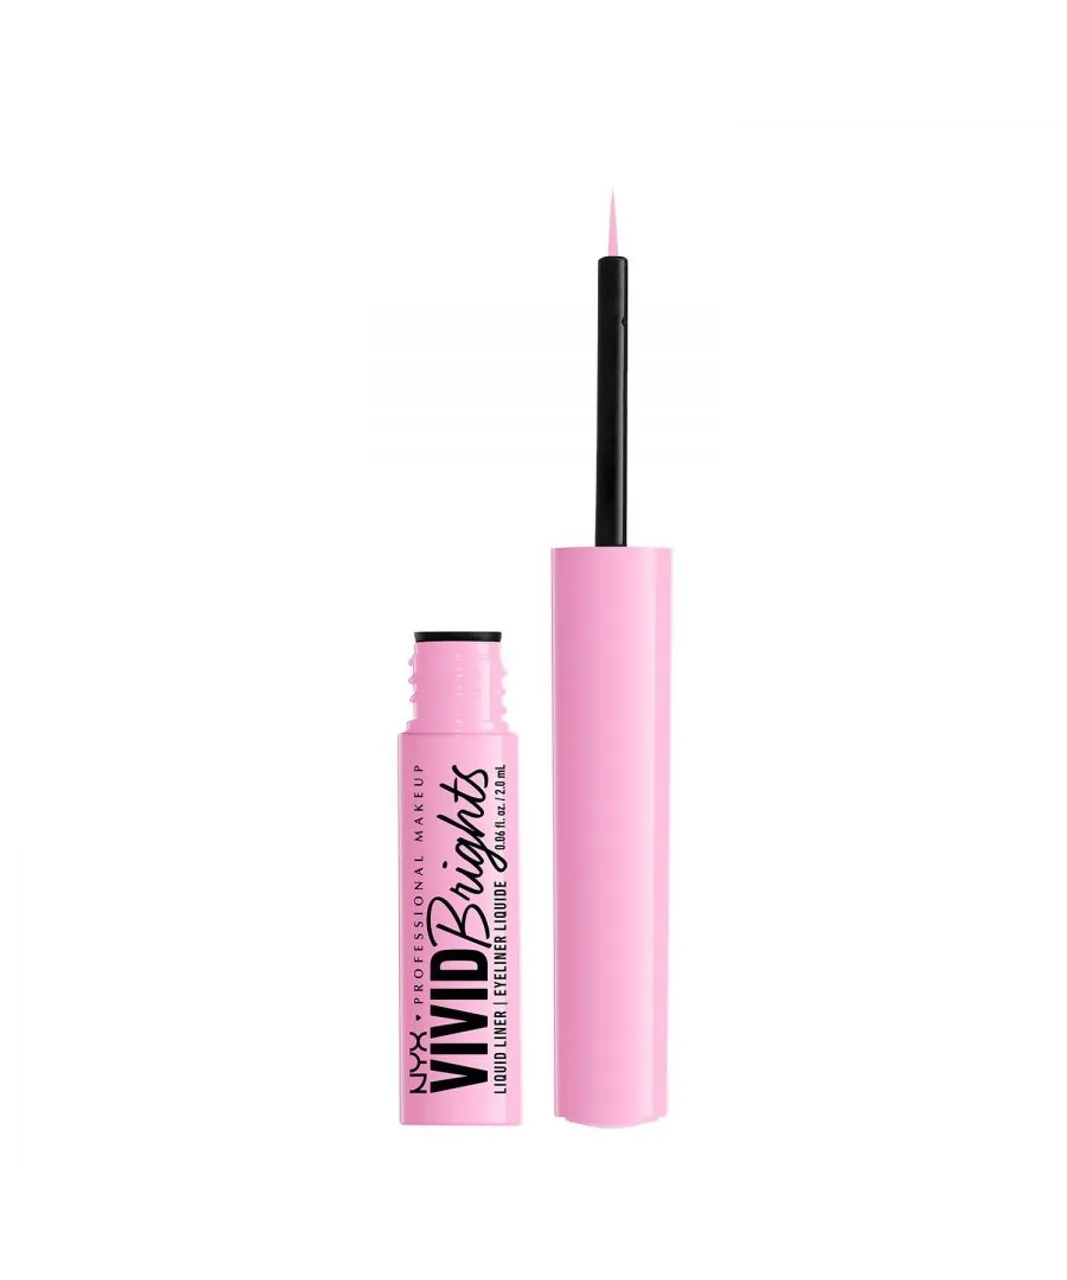 NYX Womens Professional Makeup Vivid Brights Eyeliner with Easy Glide Formula, Sneaky Pink - One Size